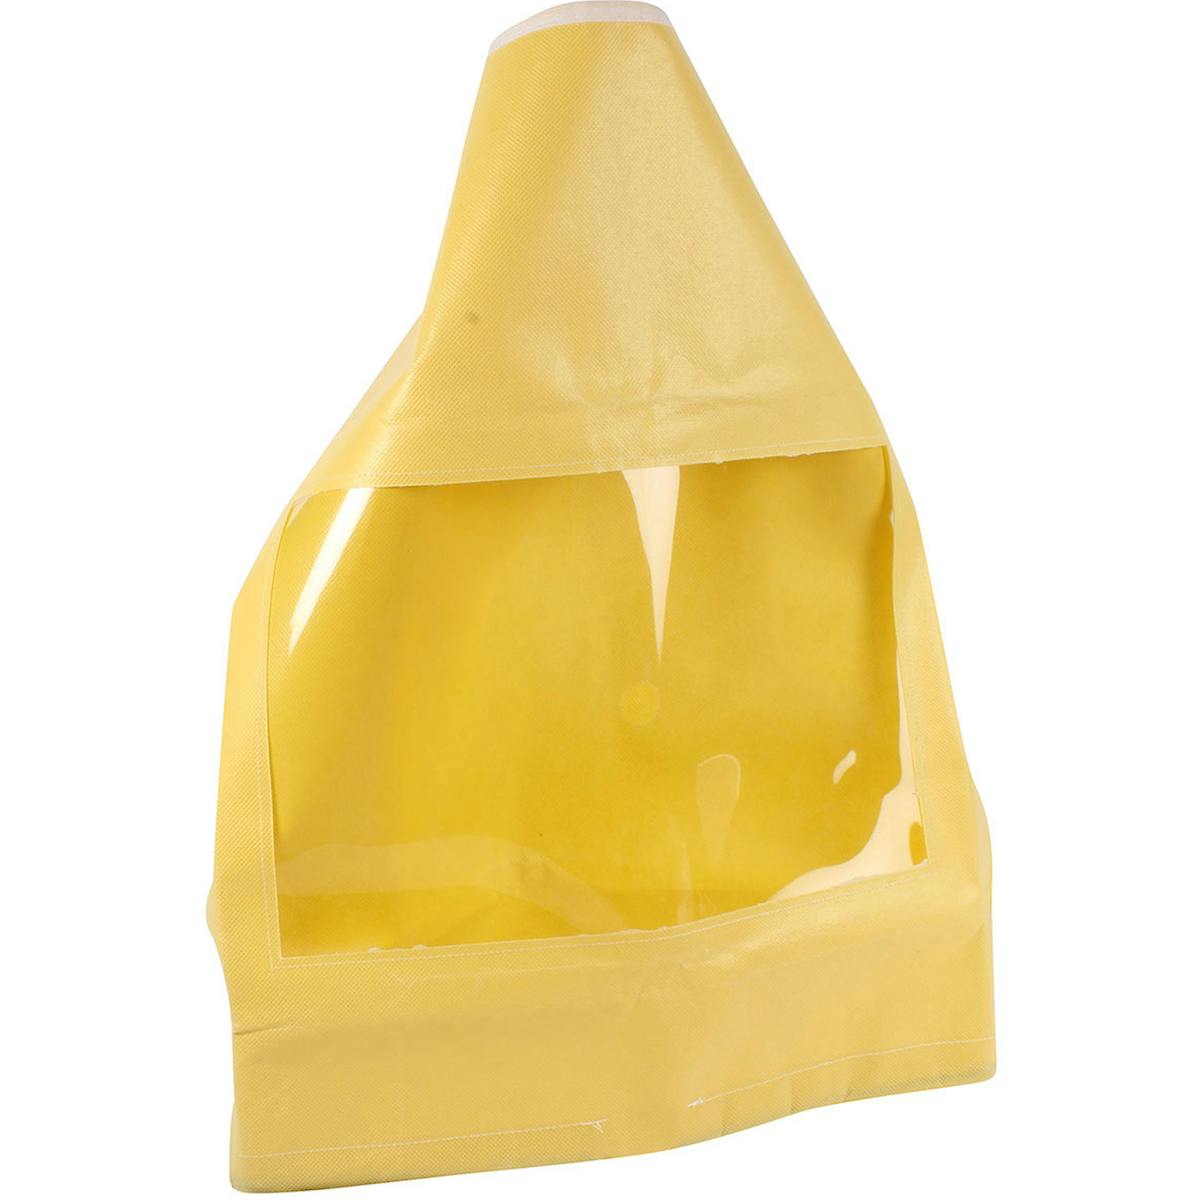 Replacement Hood for Bitrex Fit Test Kit, Yellow (270-RPHOOD) - OS